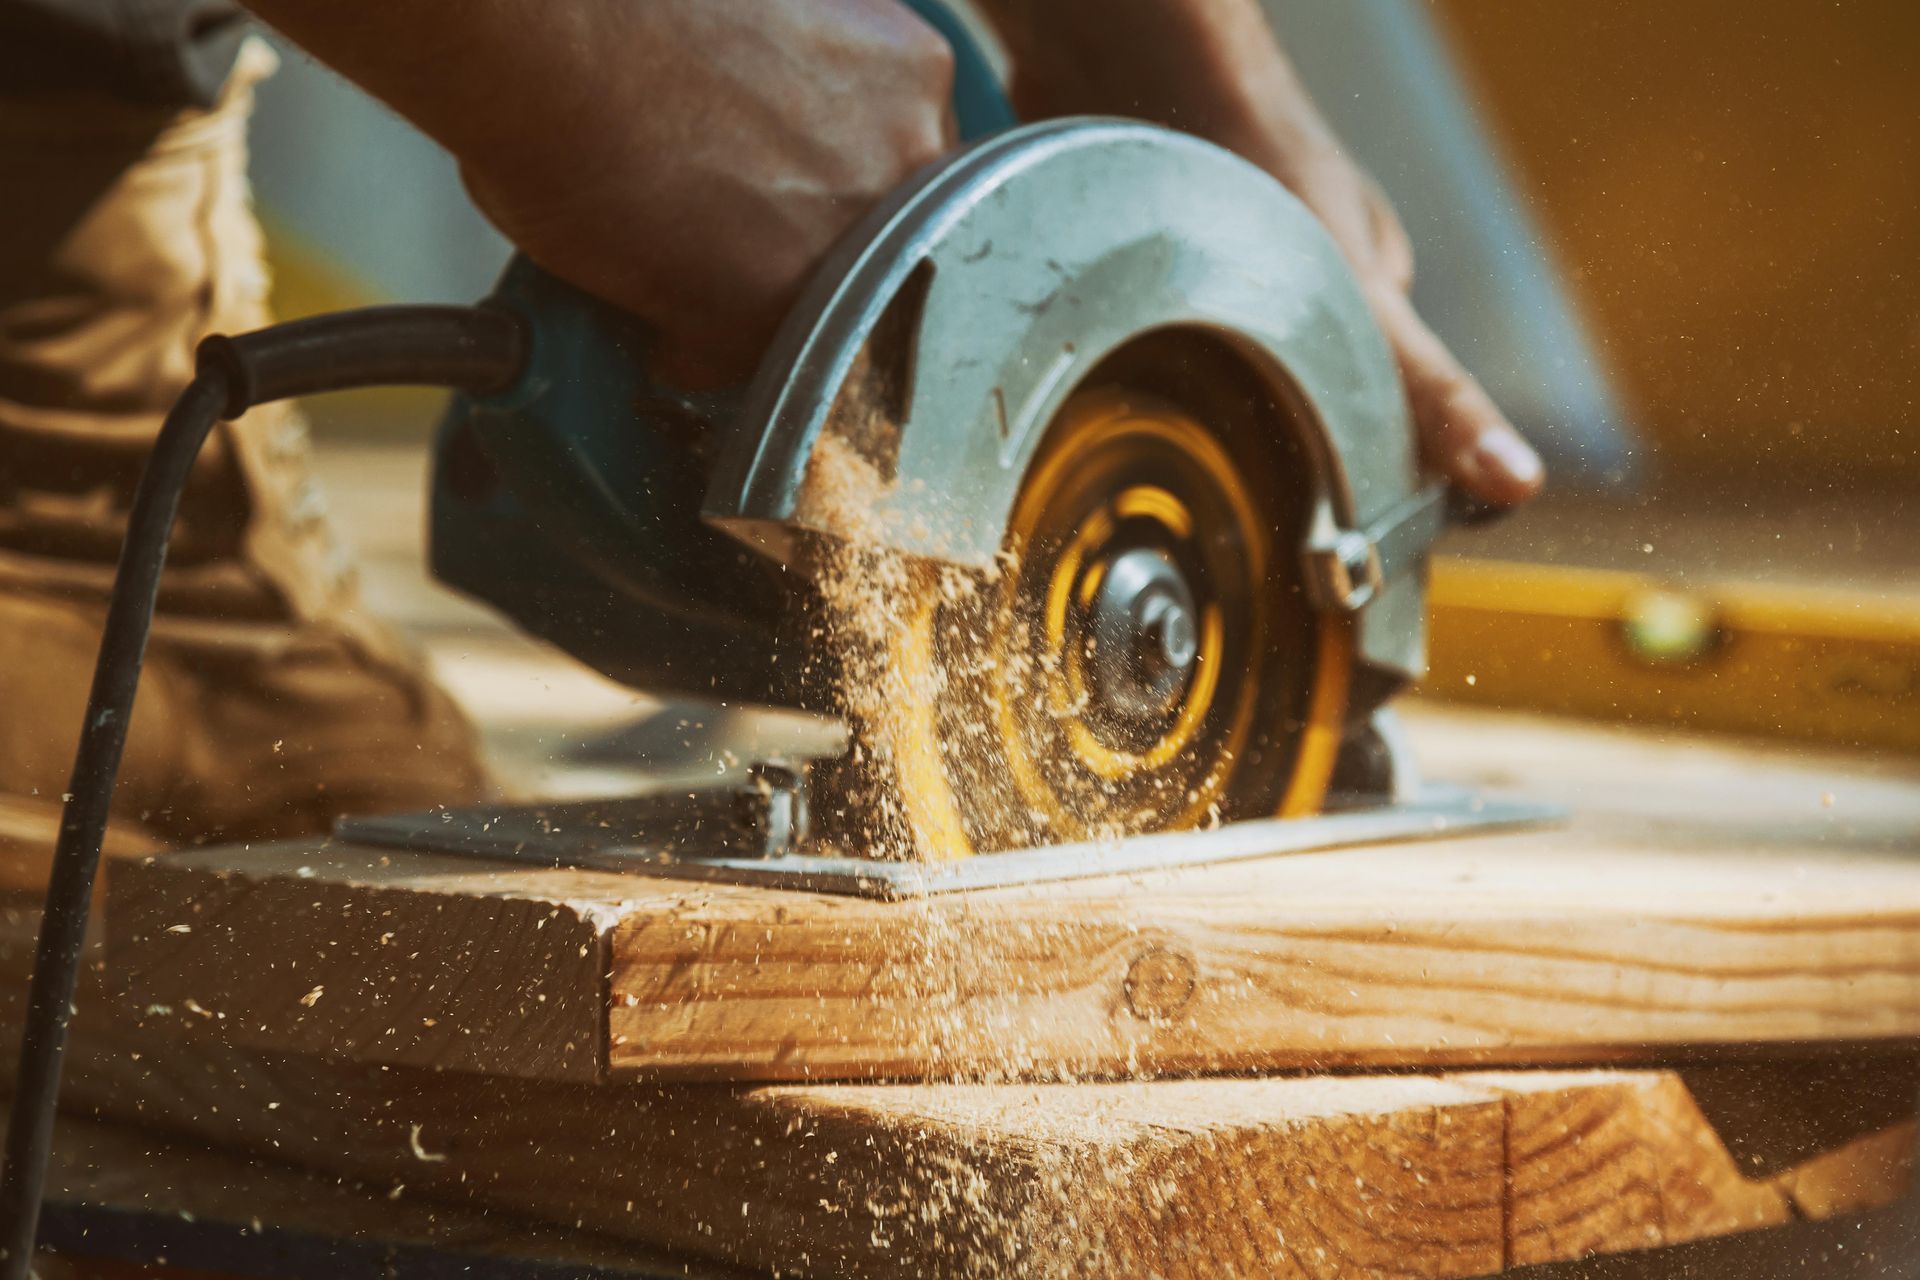 A person is using a circular saw to cut a piece of wood.